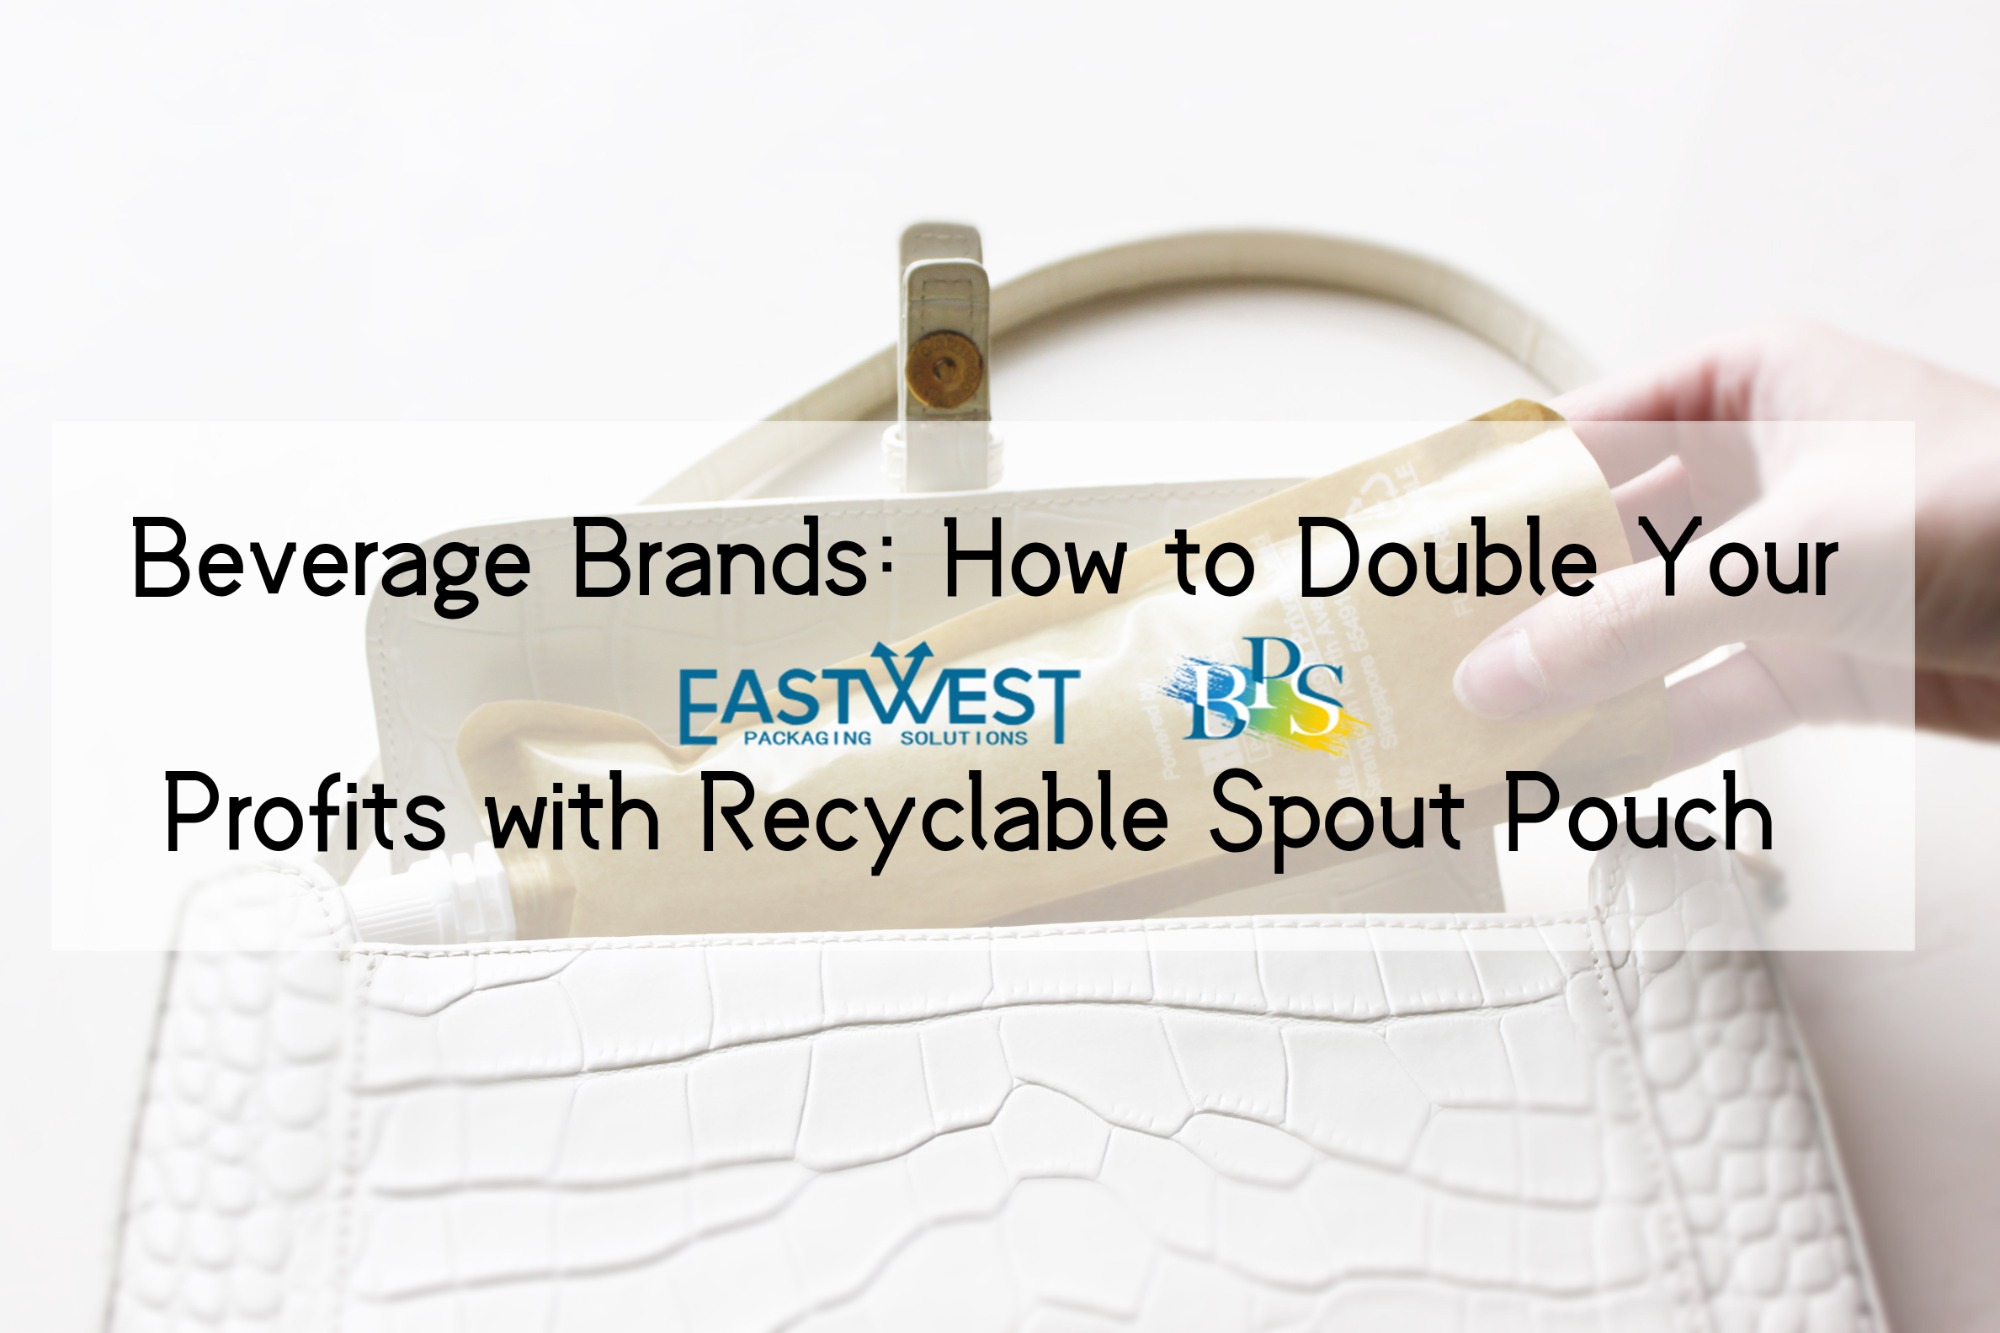 Beverage Brands: How to Double Your Profits with Recyclable Spout Pouch